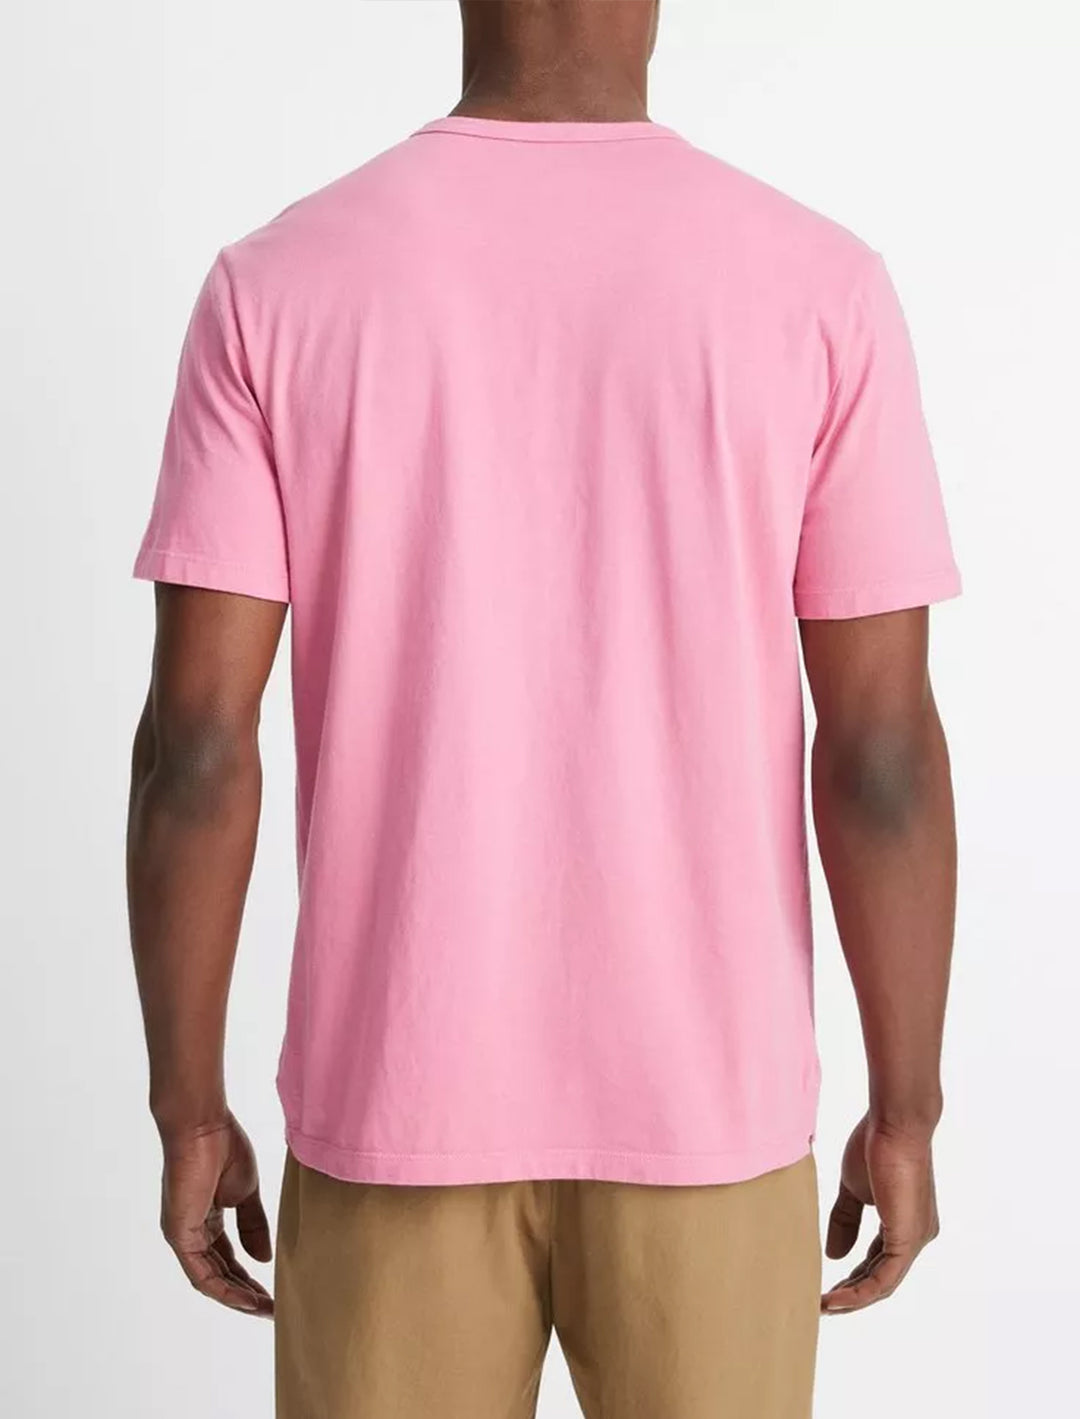 mens garment dye s/s crew in washed pink blaze (3)